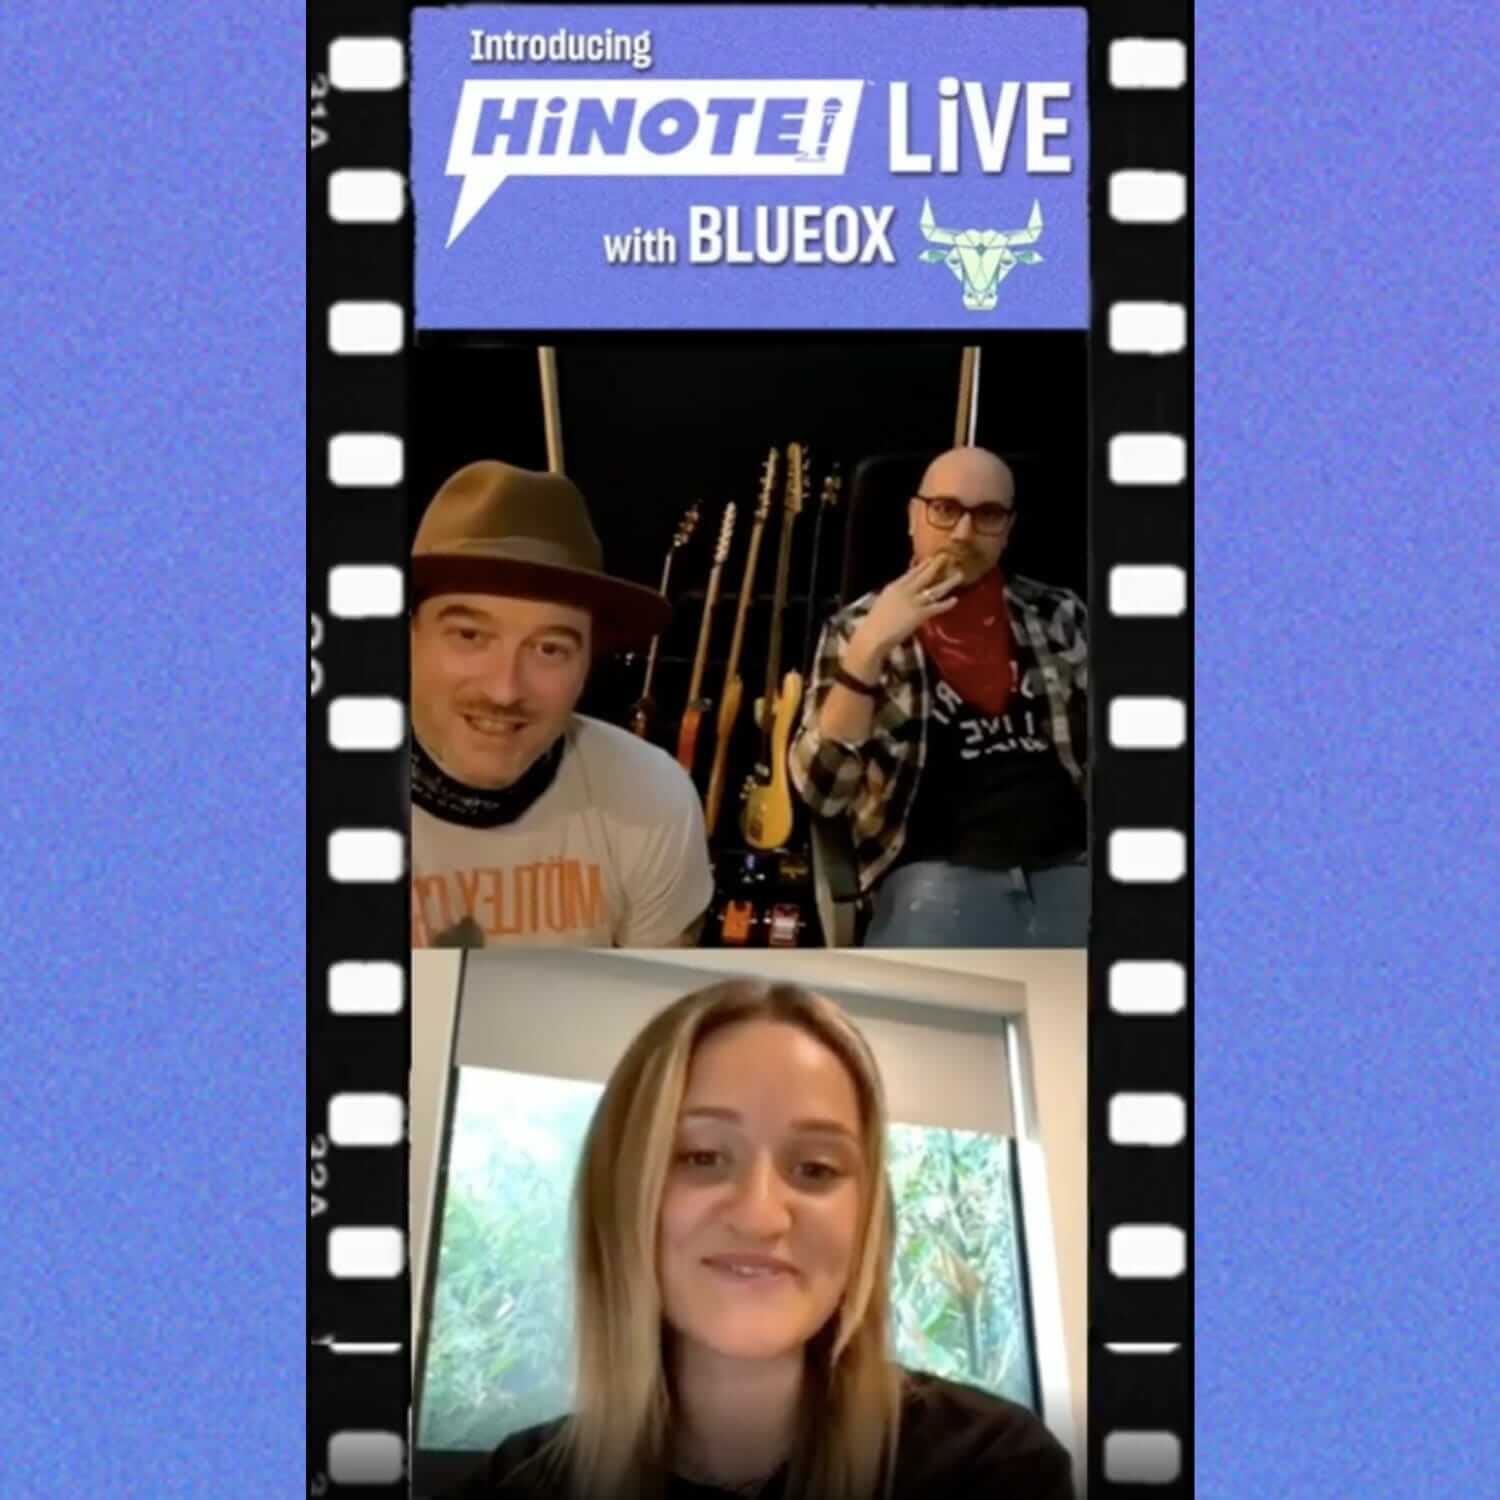 HiNOTE LiVE #6 with Blueox